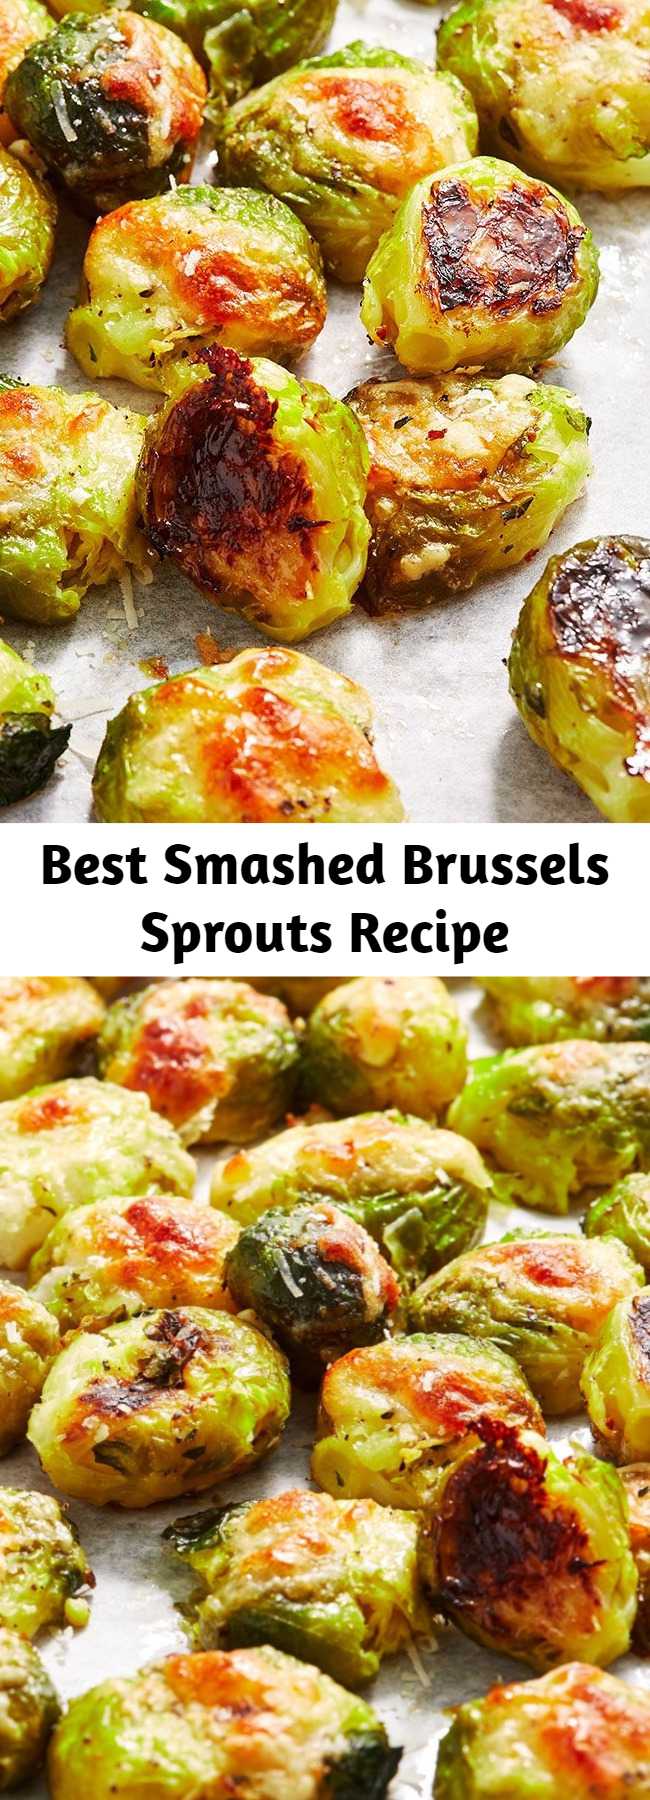 Best Smashed Brussels Sprouts Recipe - In order to smash the Brussels sprouts, you need to boil them first. (Just like smashed potatoes!) Make sure to pat them realllll dry, even after you smashed them, so that they crisp up in the oven. And never skimp on the cheese. #easy #recipe #howto #smashed #brusselssprouts #brussels #vegetarian #cheesy #cheese #masonjar #bake #brussel #roasted #parmesan